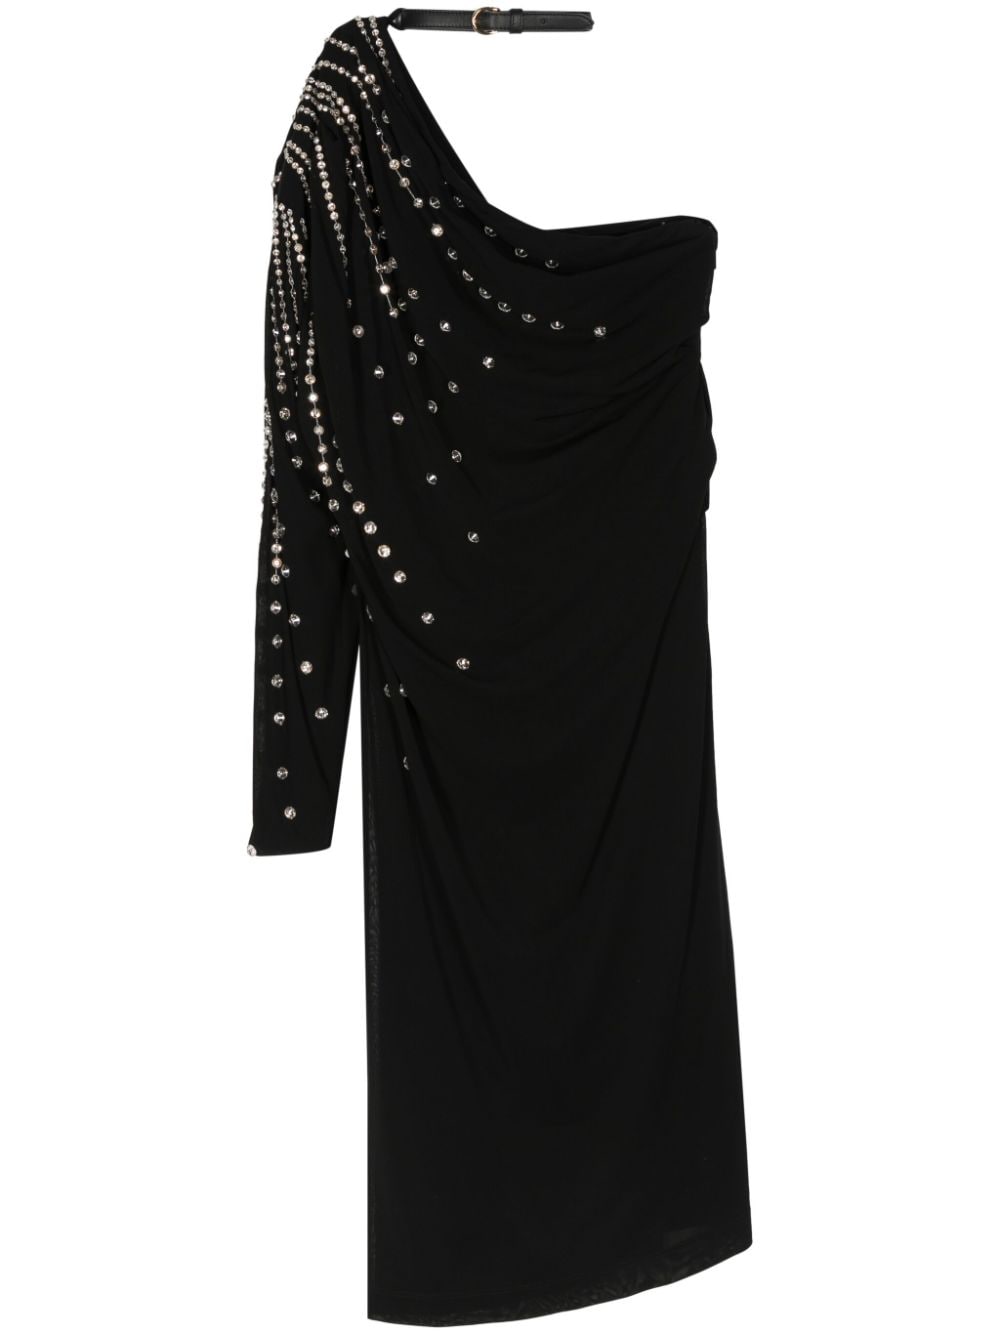 Gucci Pre-Owned 2010 crystal-embellished draped dress - Schwarz von Gucci Pre-Owned